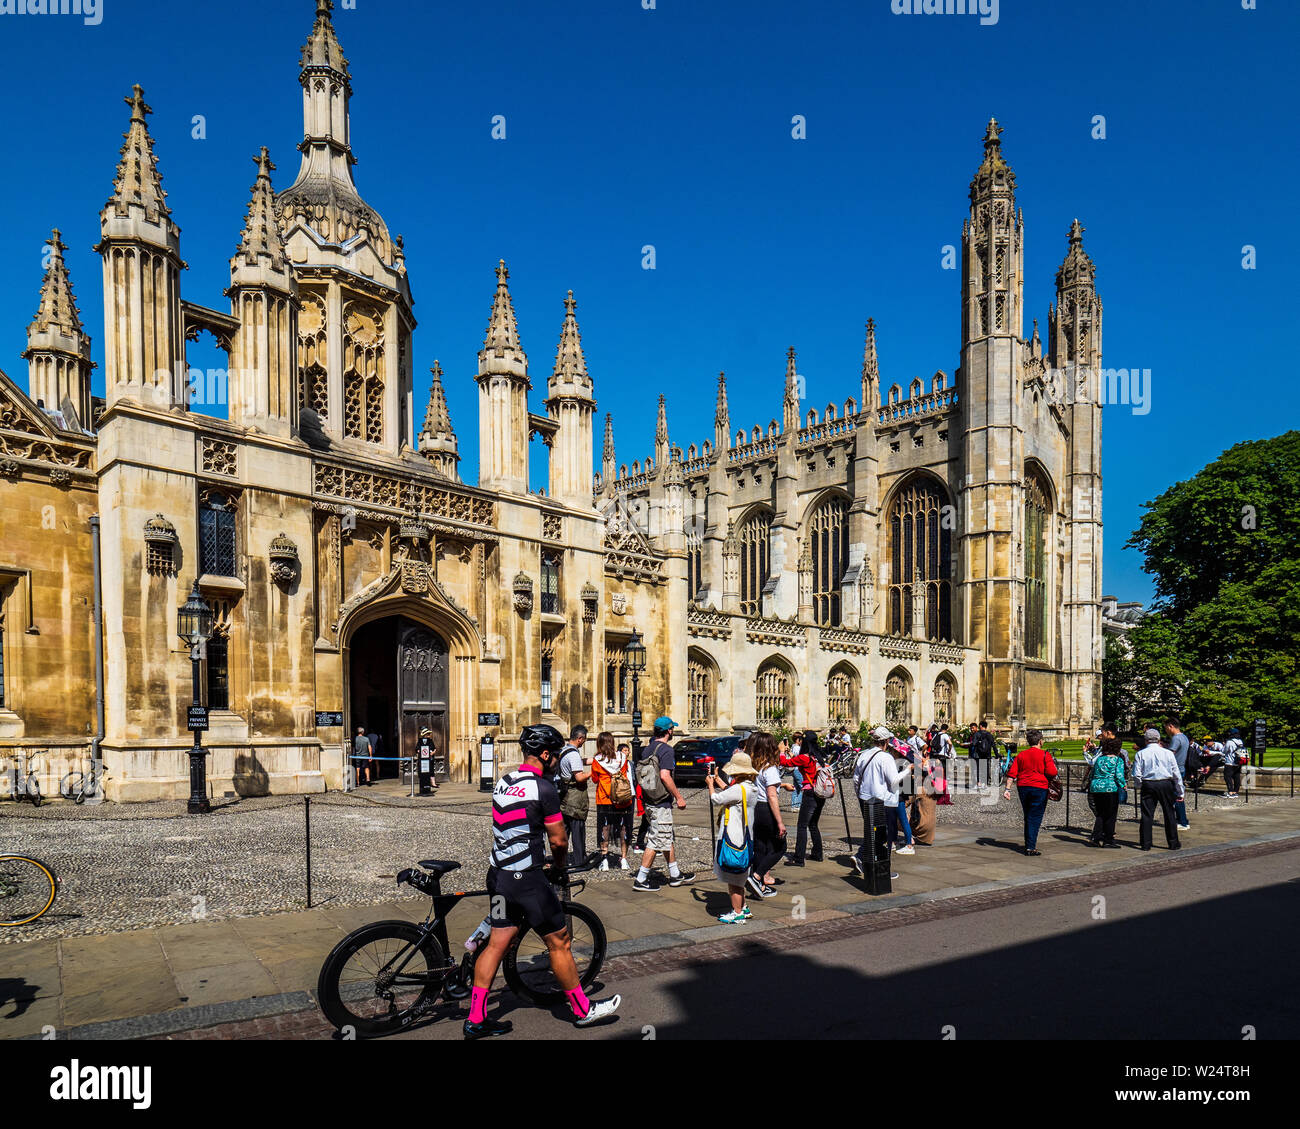 Cambridge Tourism - Cambridge University Kings College - tourists outside the front of Kings College in Central Cambridge Stock Photo